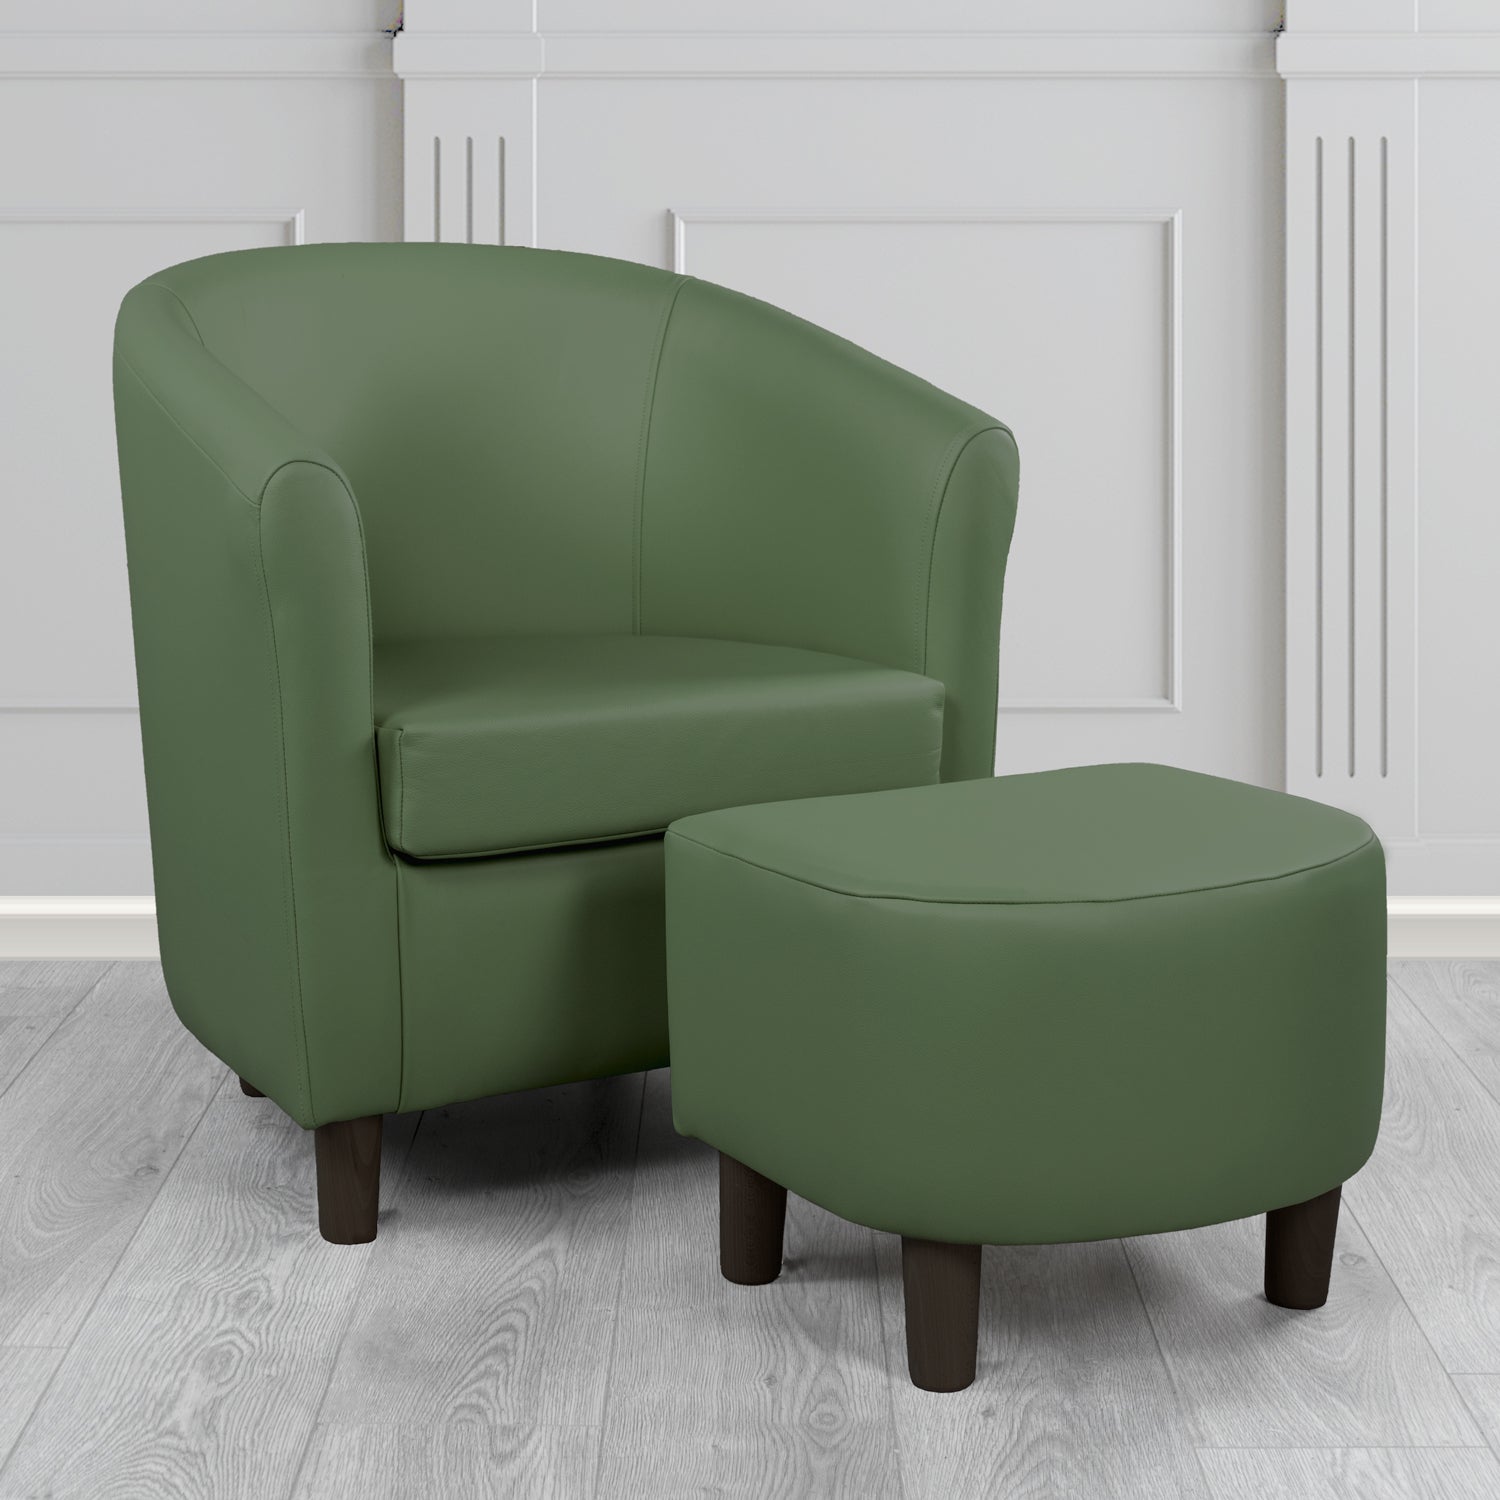 Tuscany Shelly Forest Green Crib 5 Genuine Leather Tub Chair & Footstool Set (6617129254954)